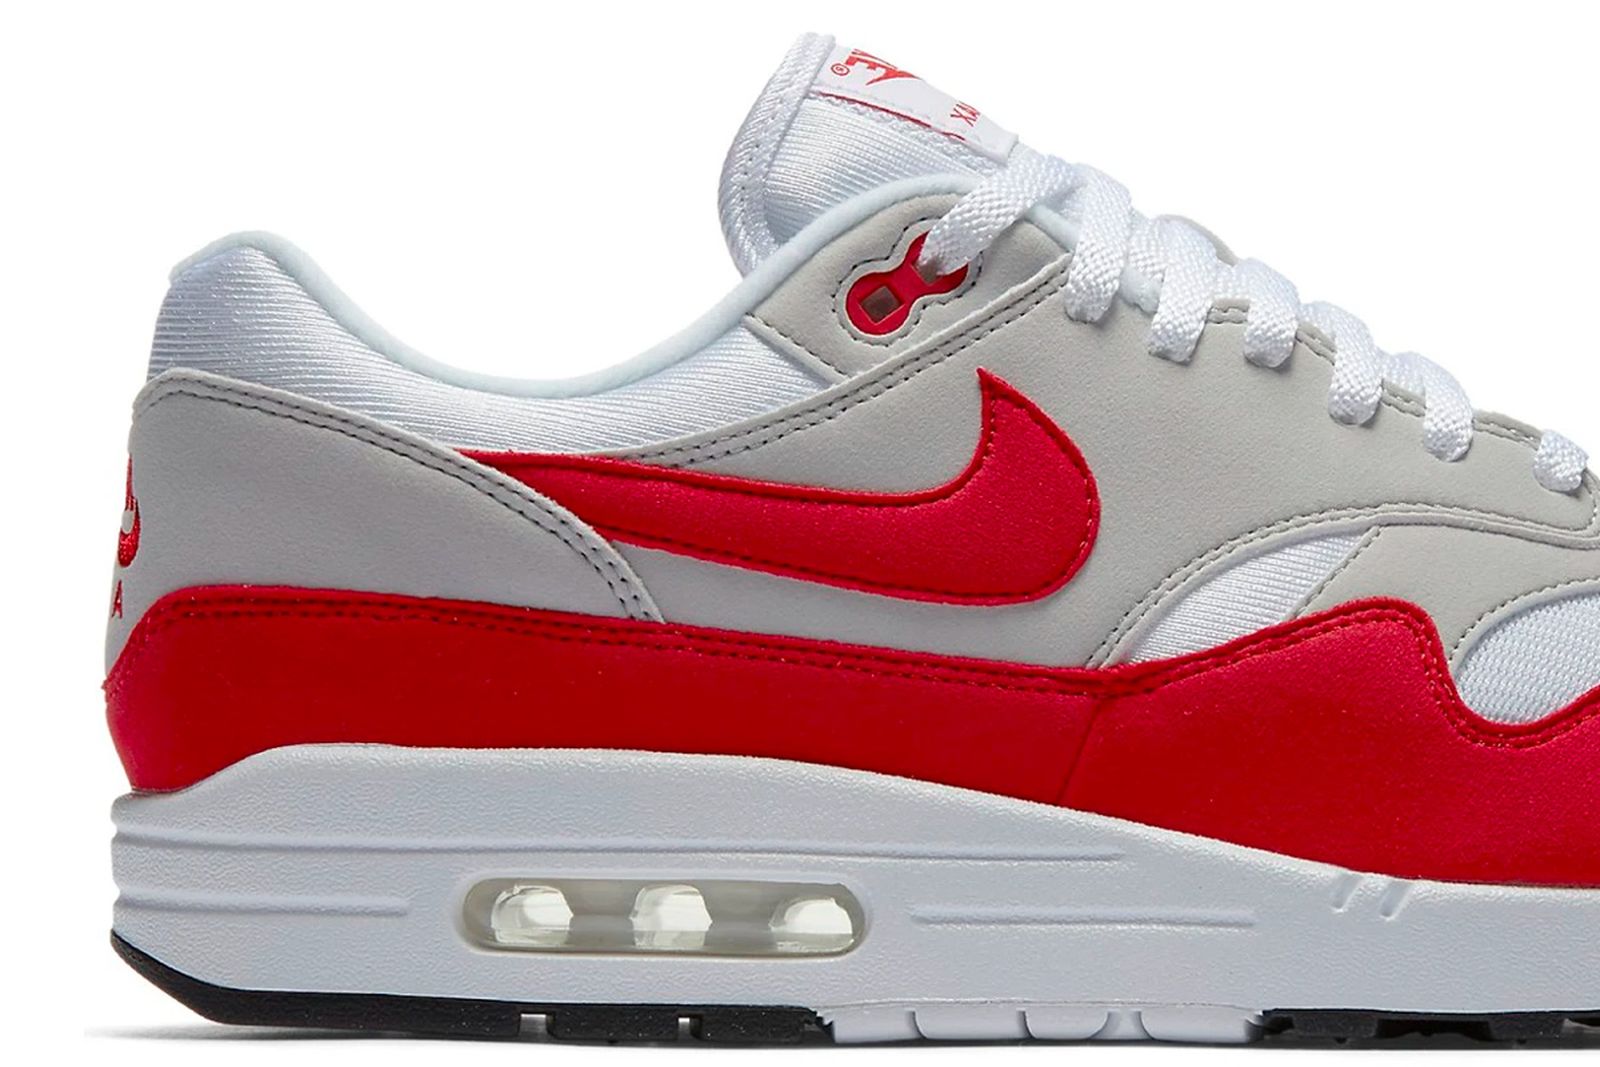 tell me Exclusion Miscellaneous goods 11 of the Best Nike Air Max 1 Colorways to Wear in 2021